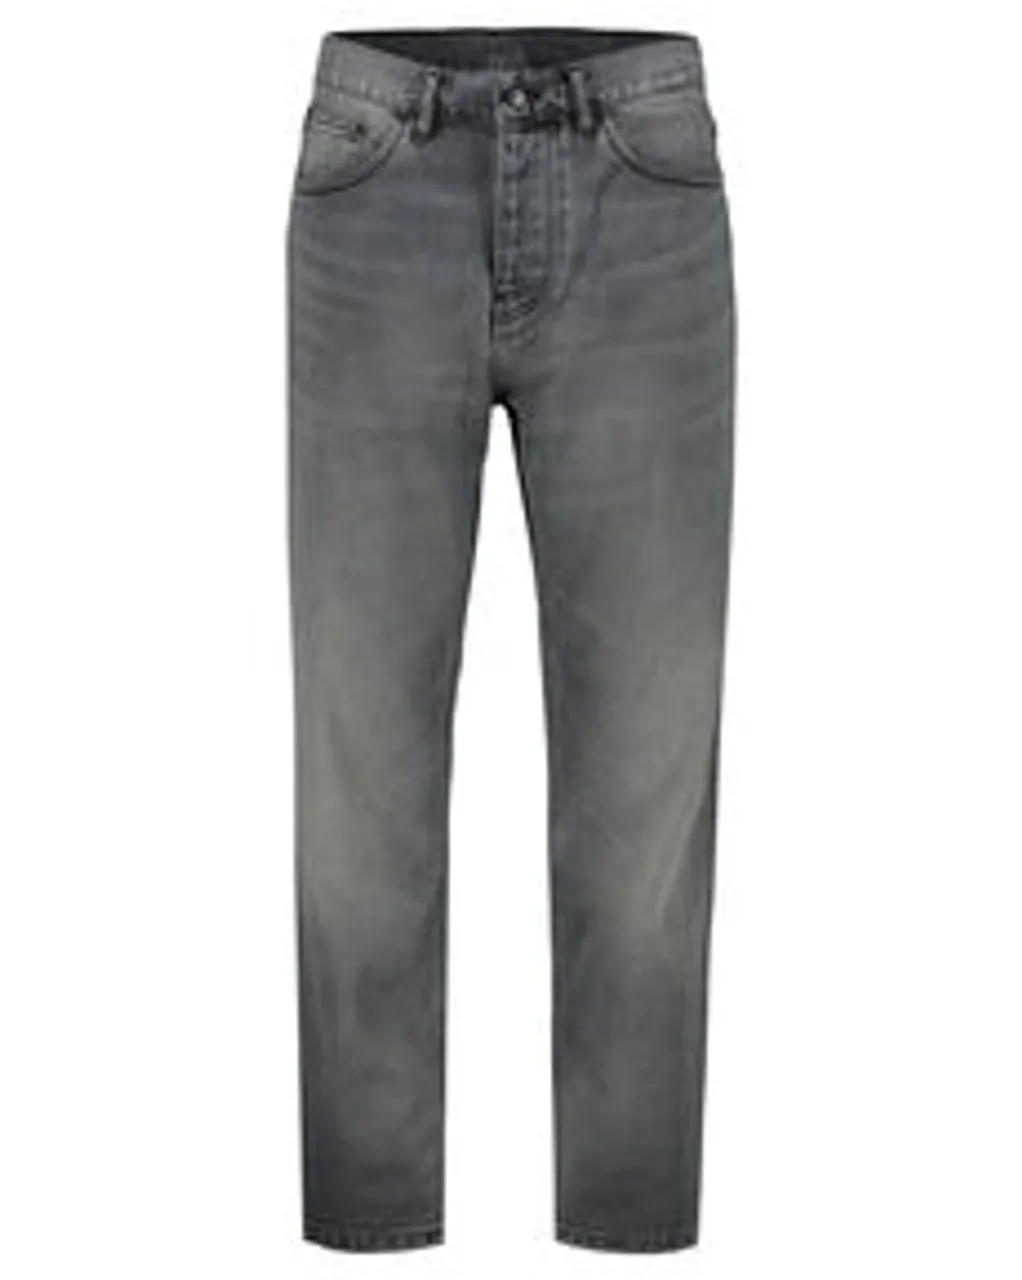 Herren Jeans NEWEL PANT Relaxed Tapered Fit